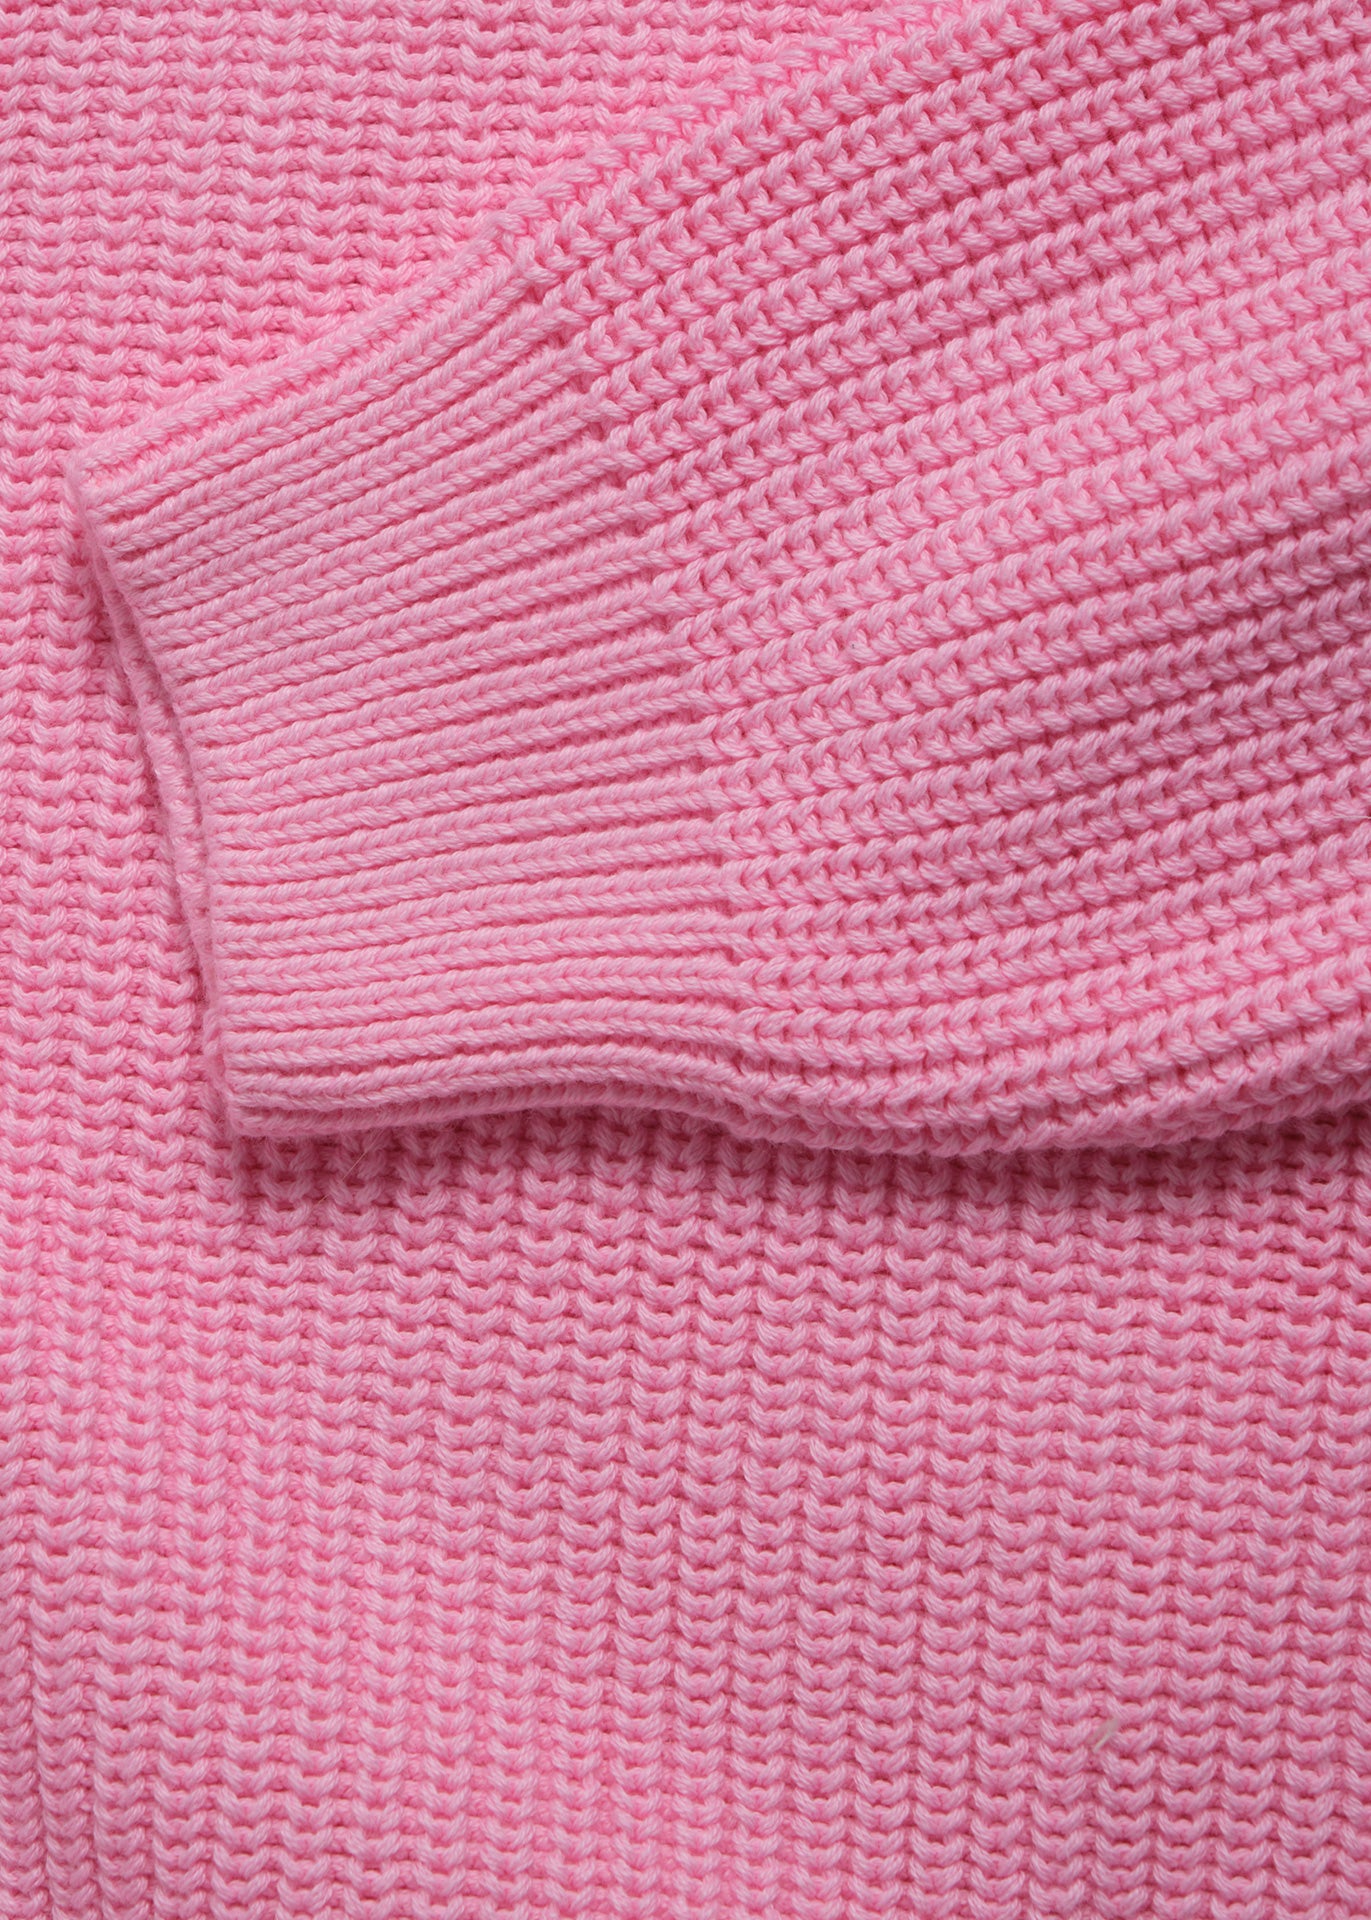 The Pink knit